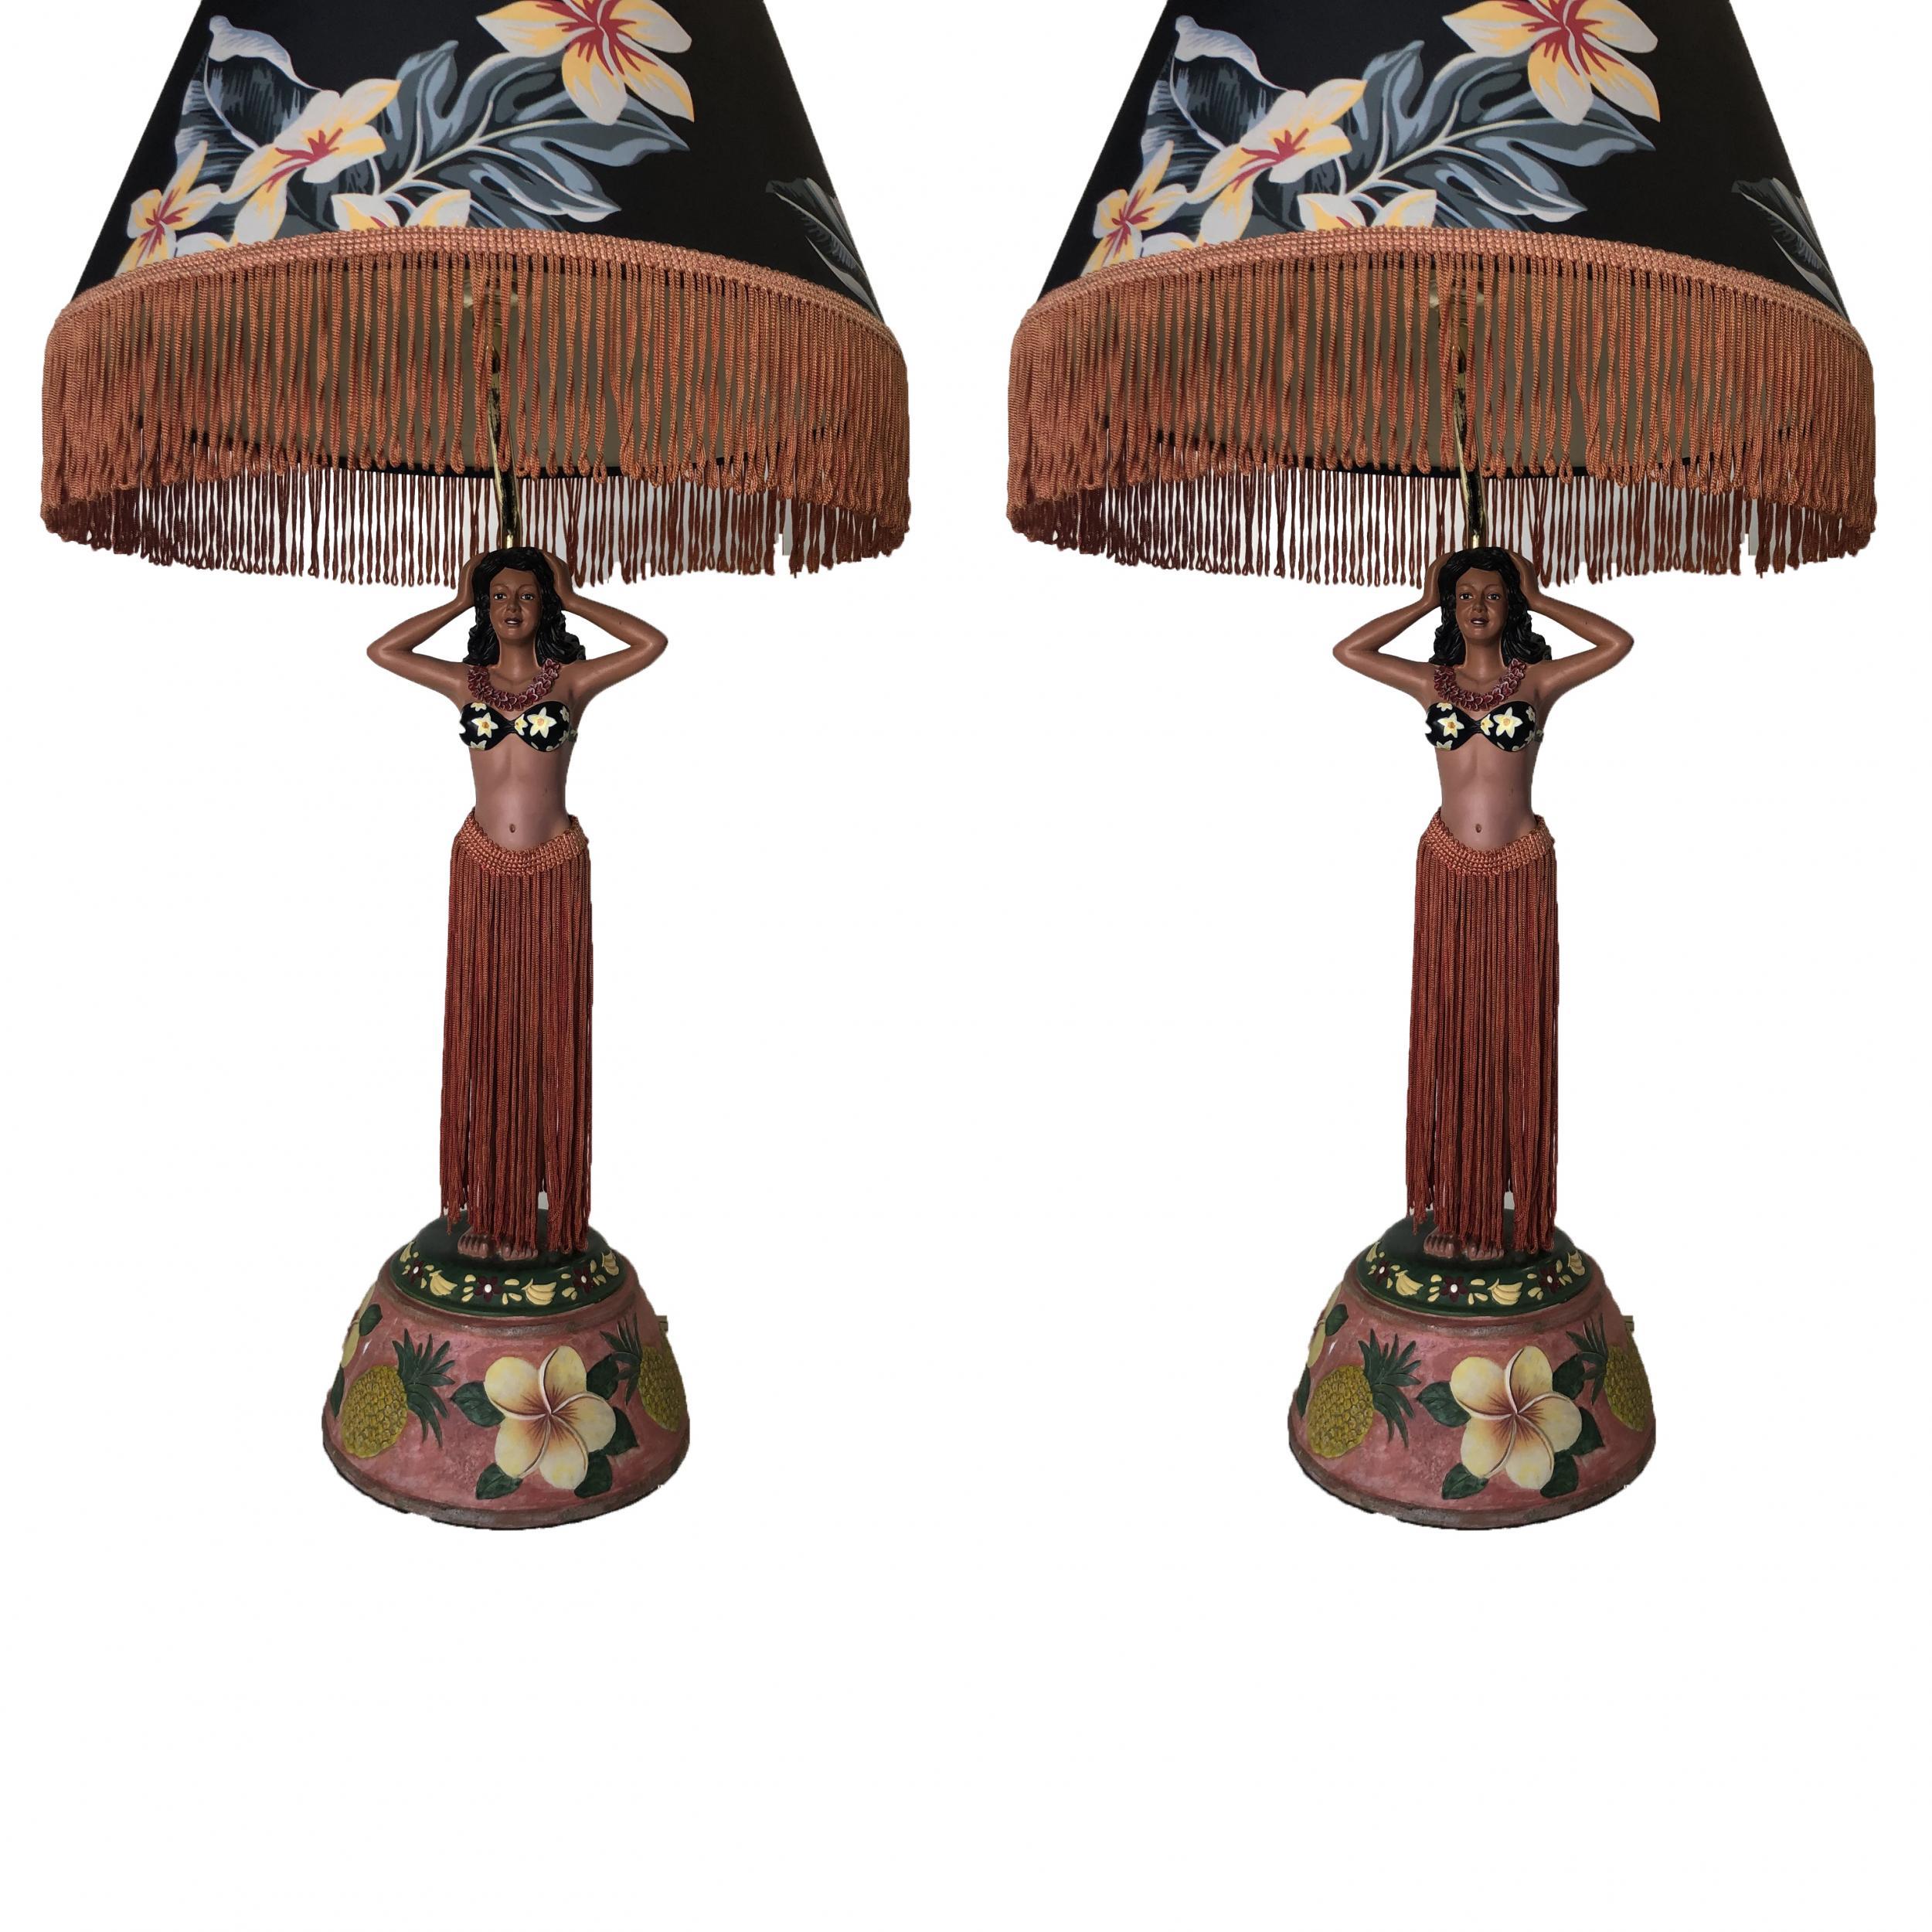 Pair of hula girl resin table lamp with floral fringe lamp shades.

Measures: 27